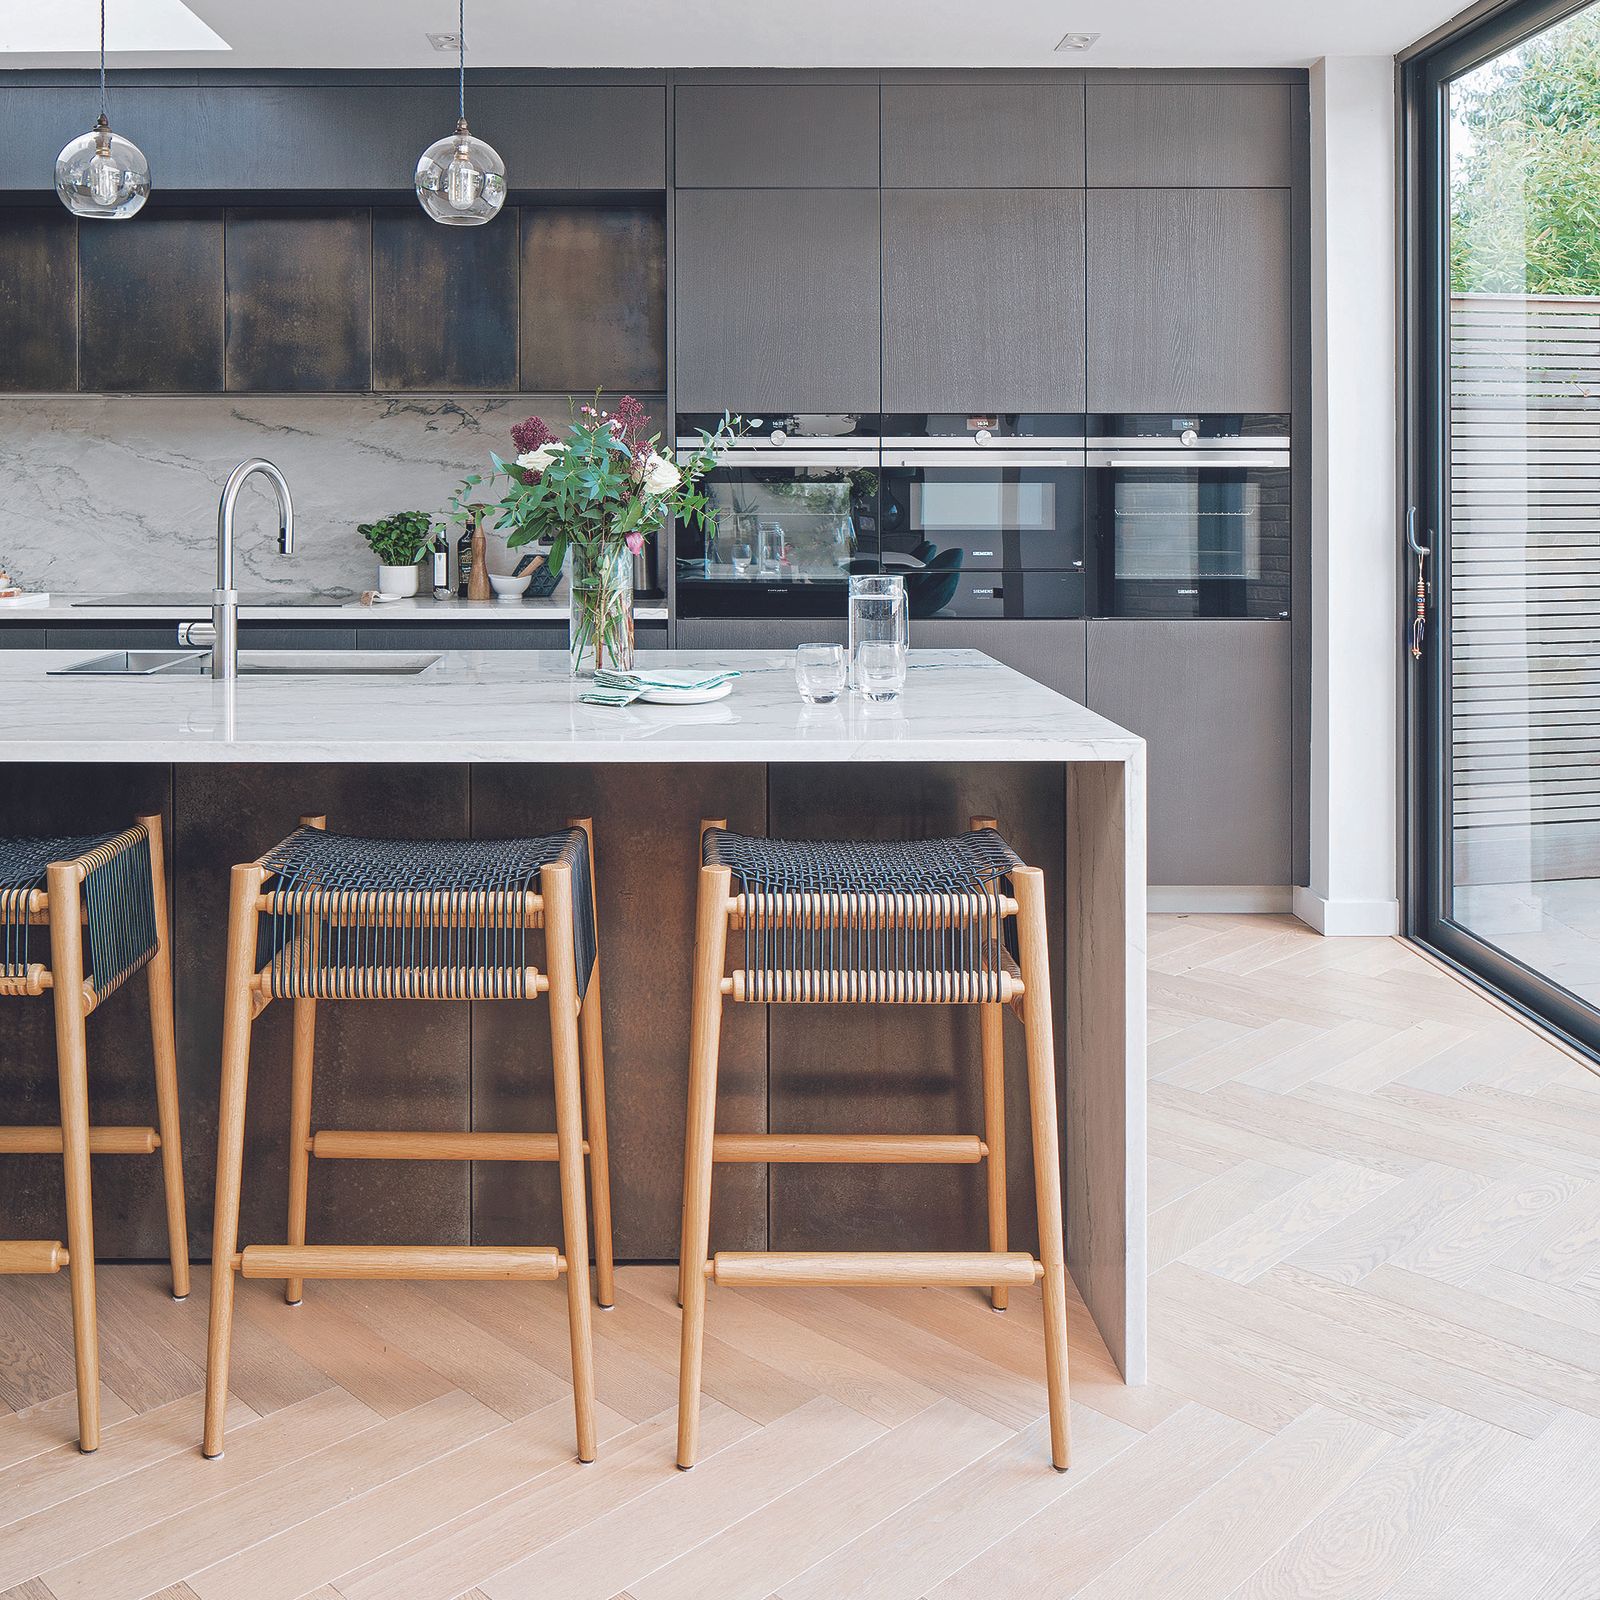 Underfloor heating vs radiators: which is better for you? | Ideal Home